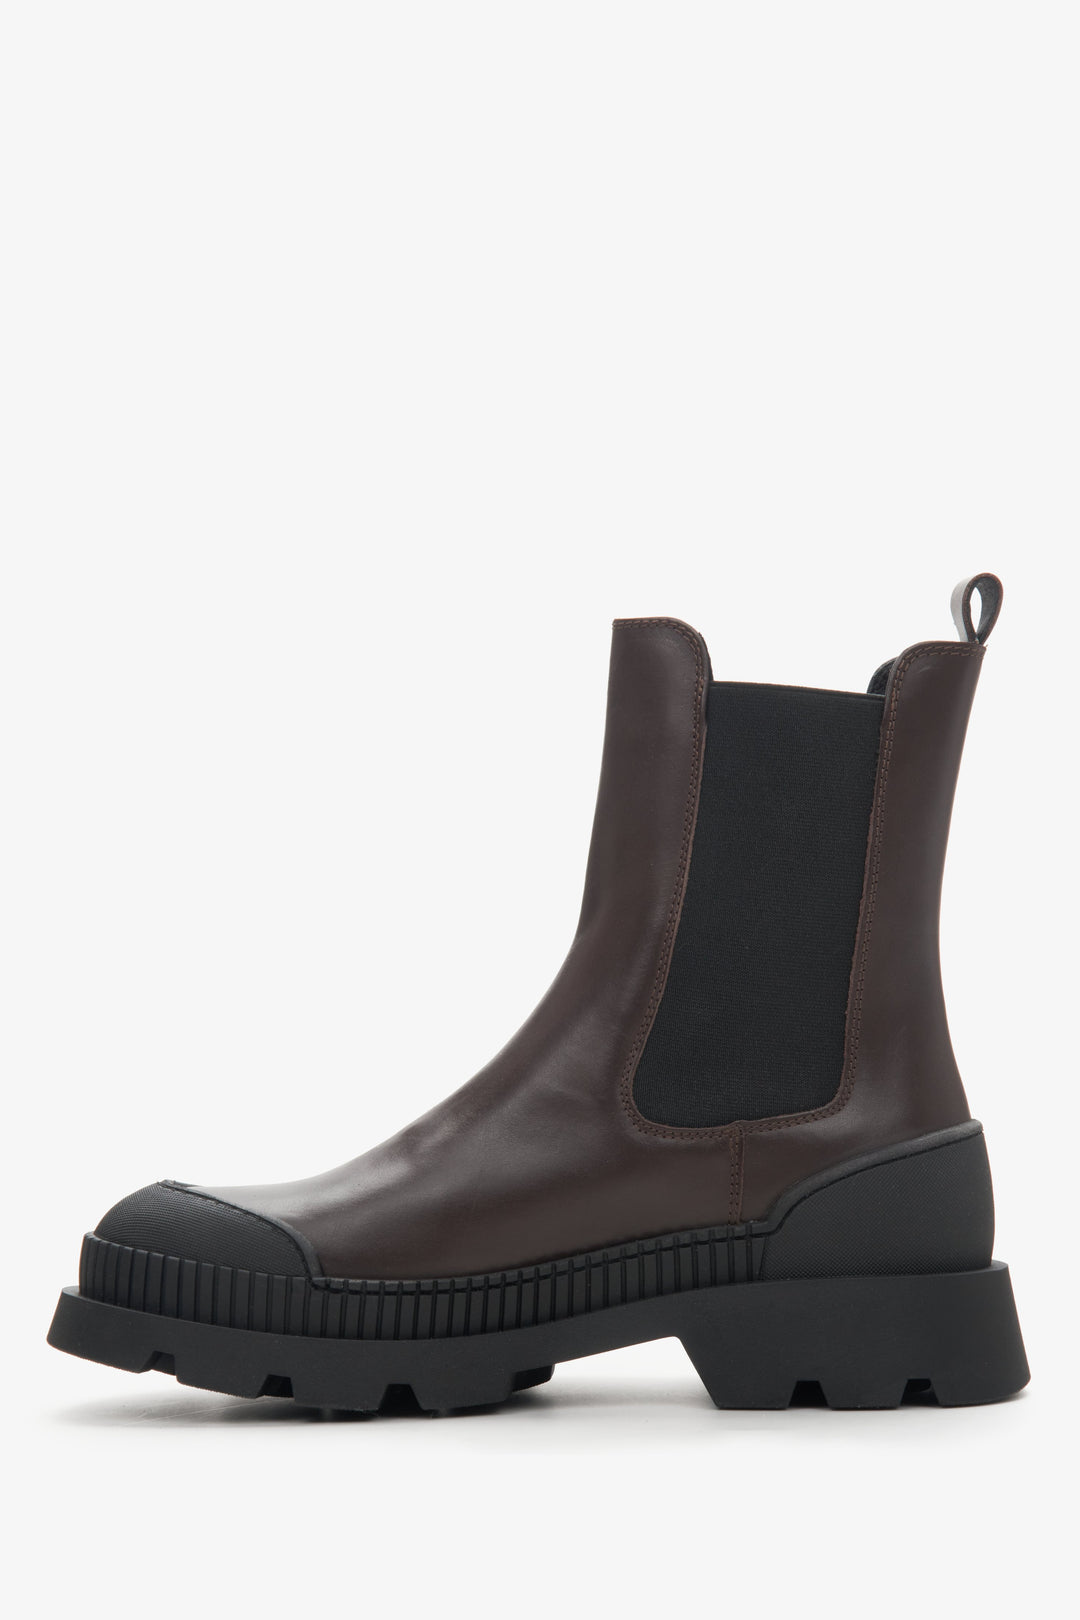 Brown and black Estro women's Chelsea boots made of genuine leather - shoe profile.